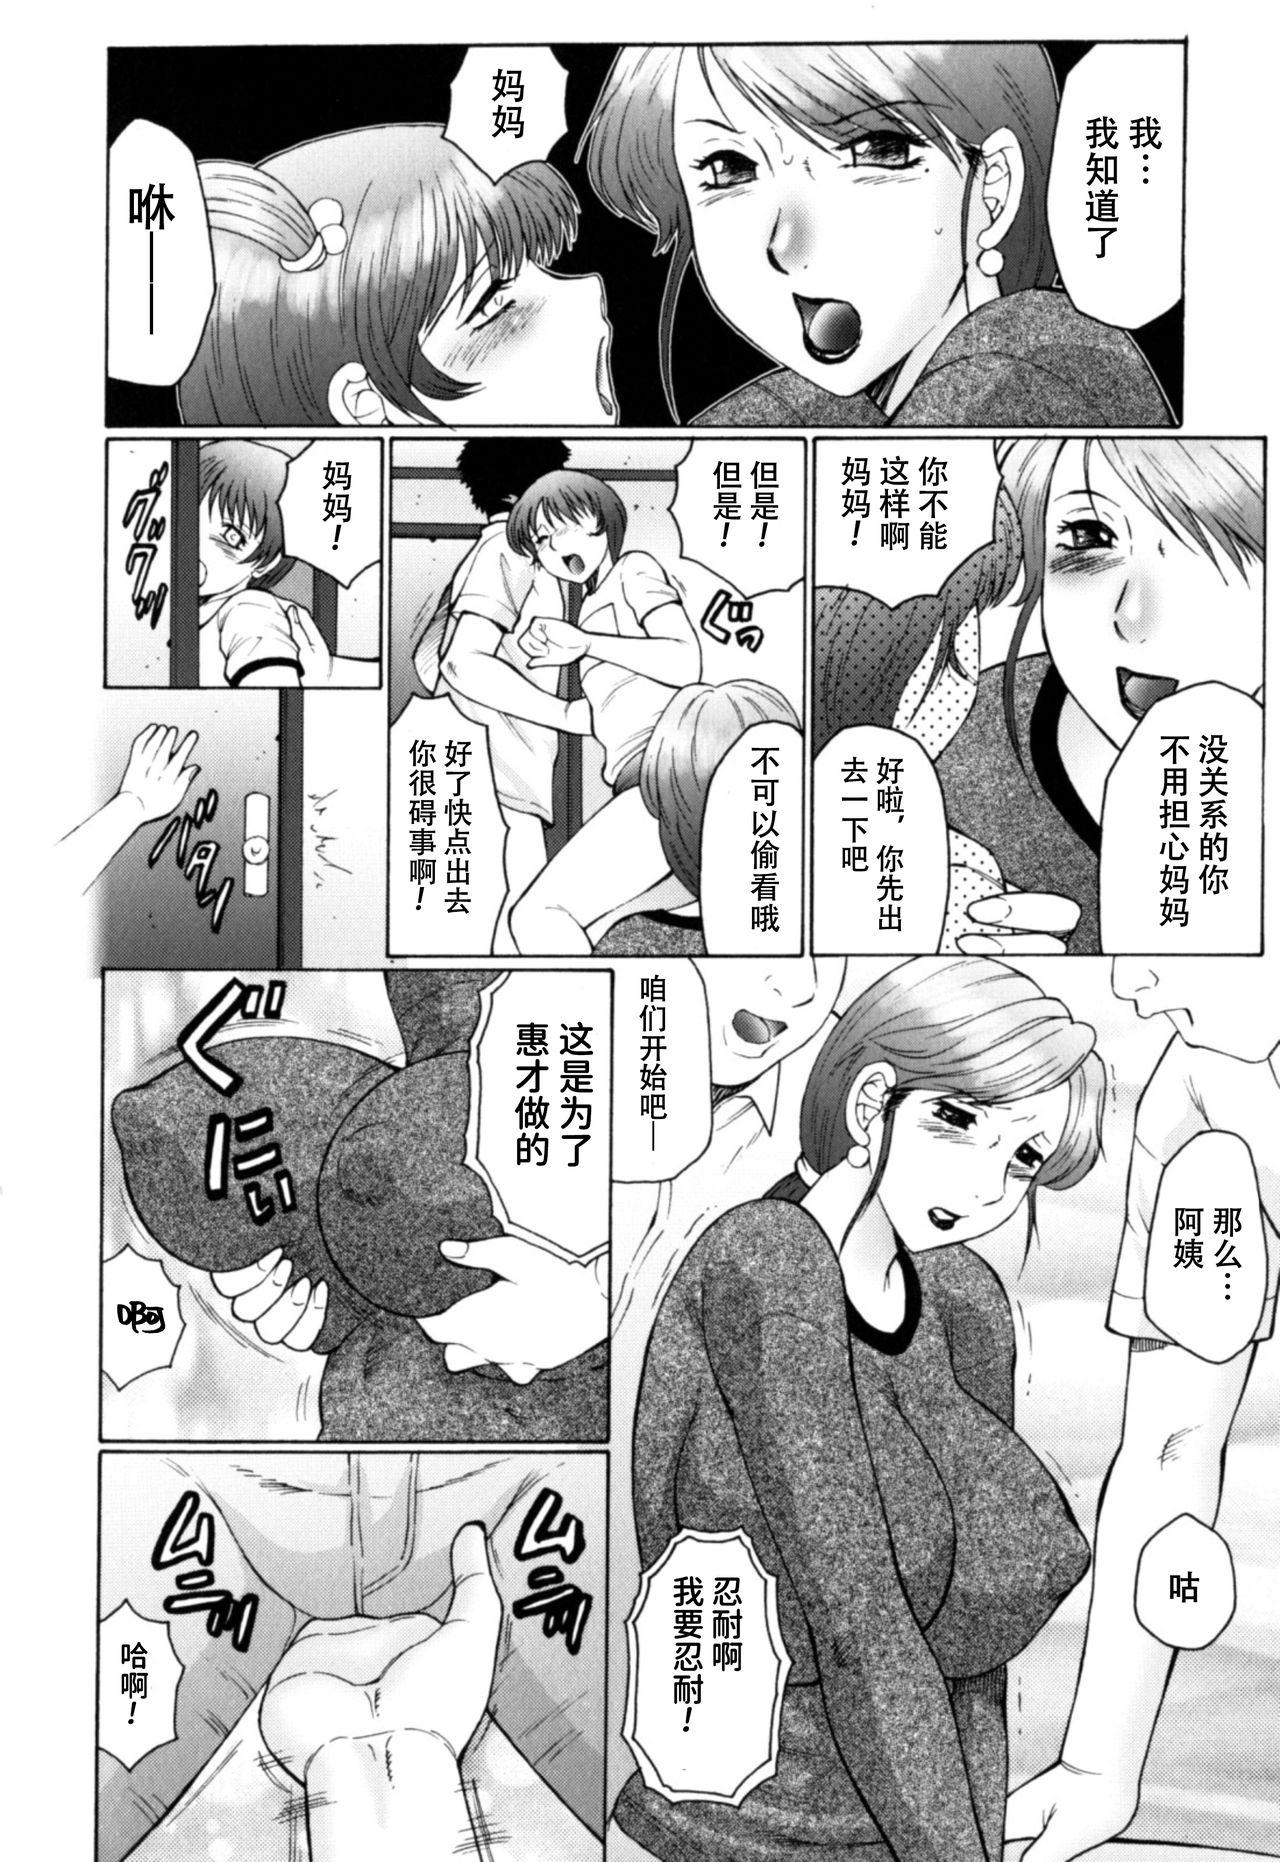 Mmd [Fuusen Club] Haha Mamire Ch. 1 [Chinese]【不可视汉化】 Pure18 - Page 11